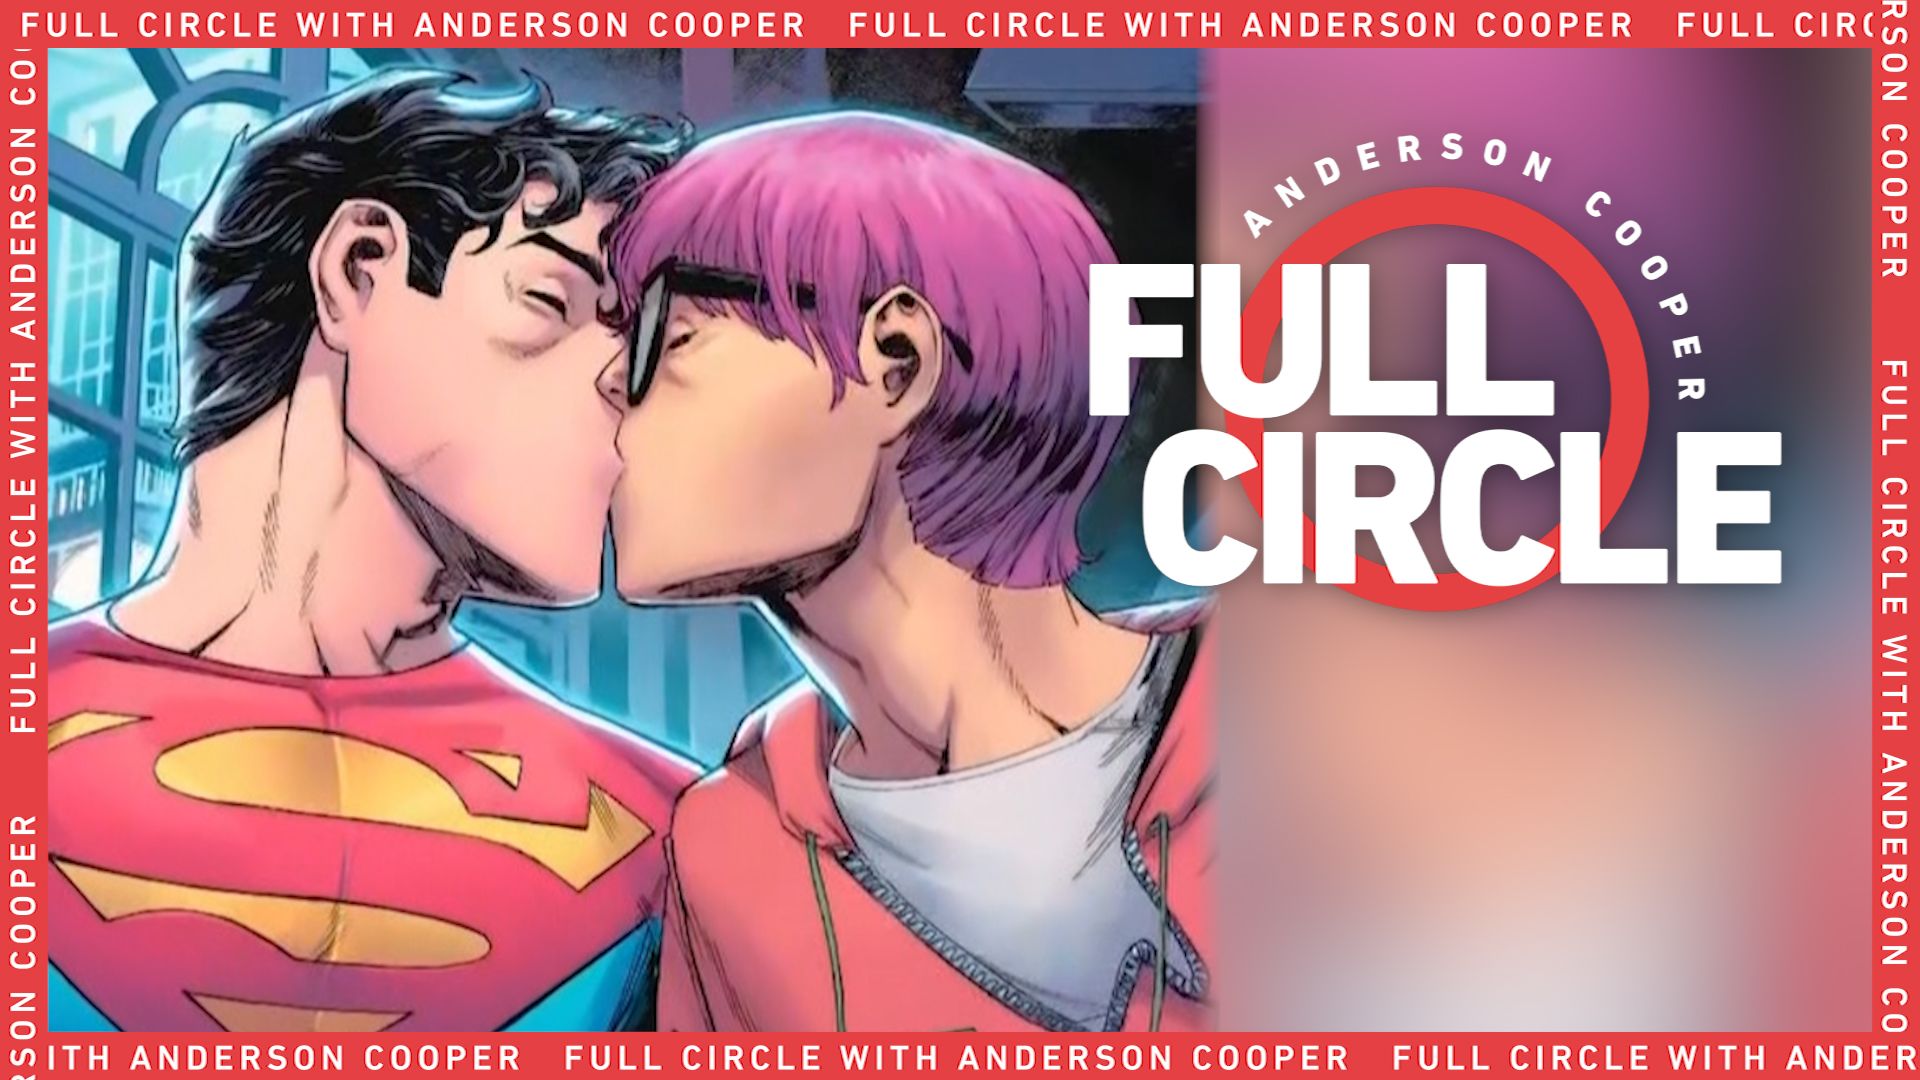 DC Comics reveal that latest Superman character is bisexual - BBC News